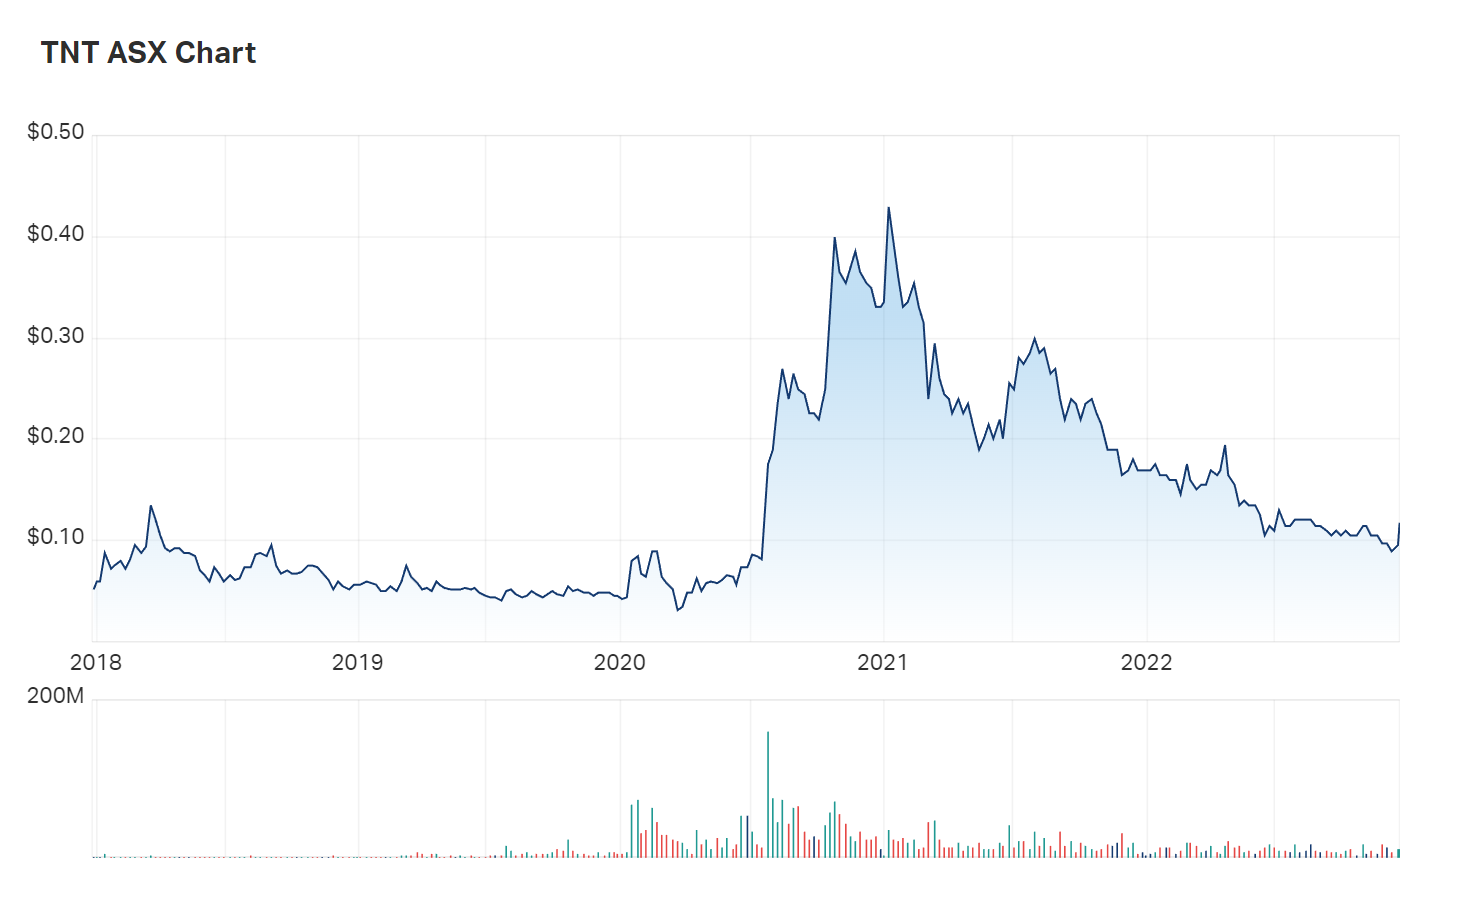 A look at Tesserent's five year charts contextualises the company's performance during the first two years of the pandemic 